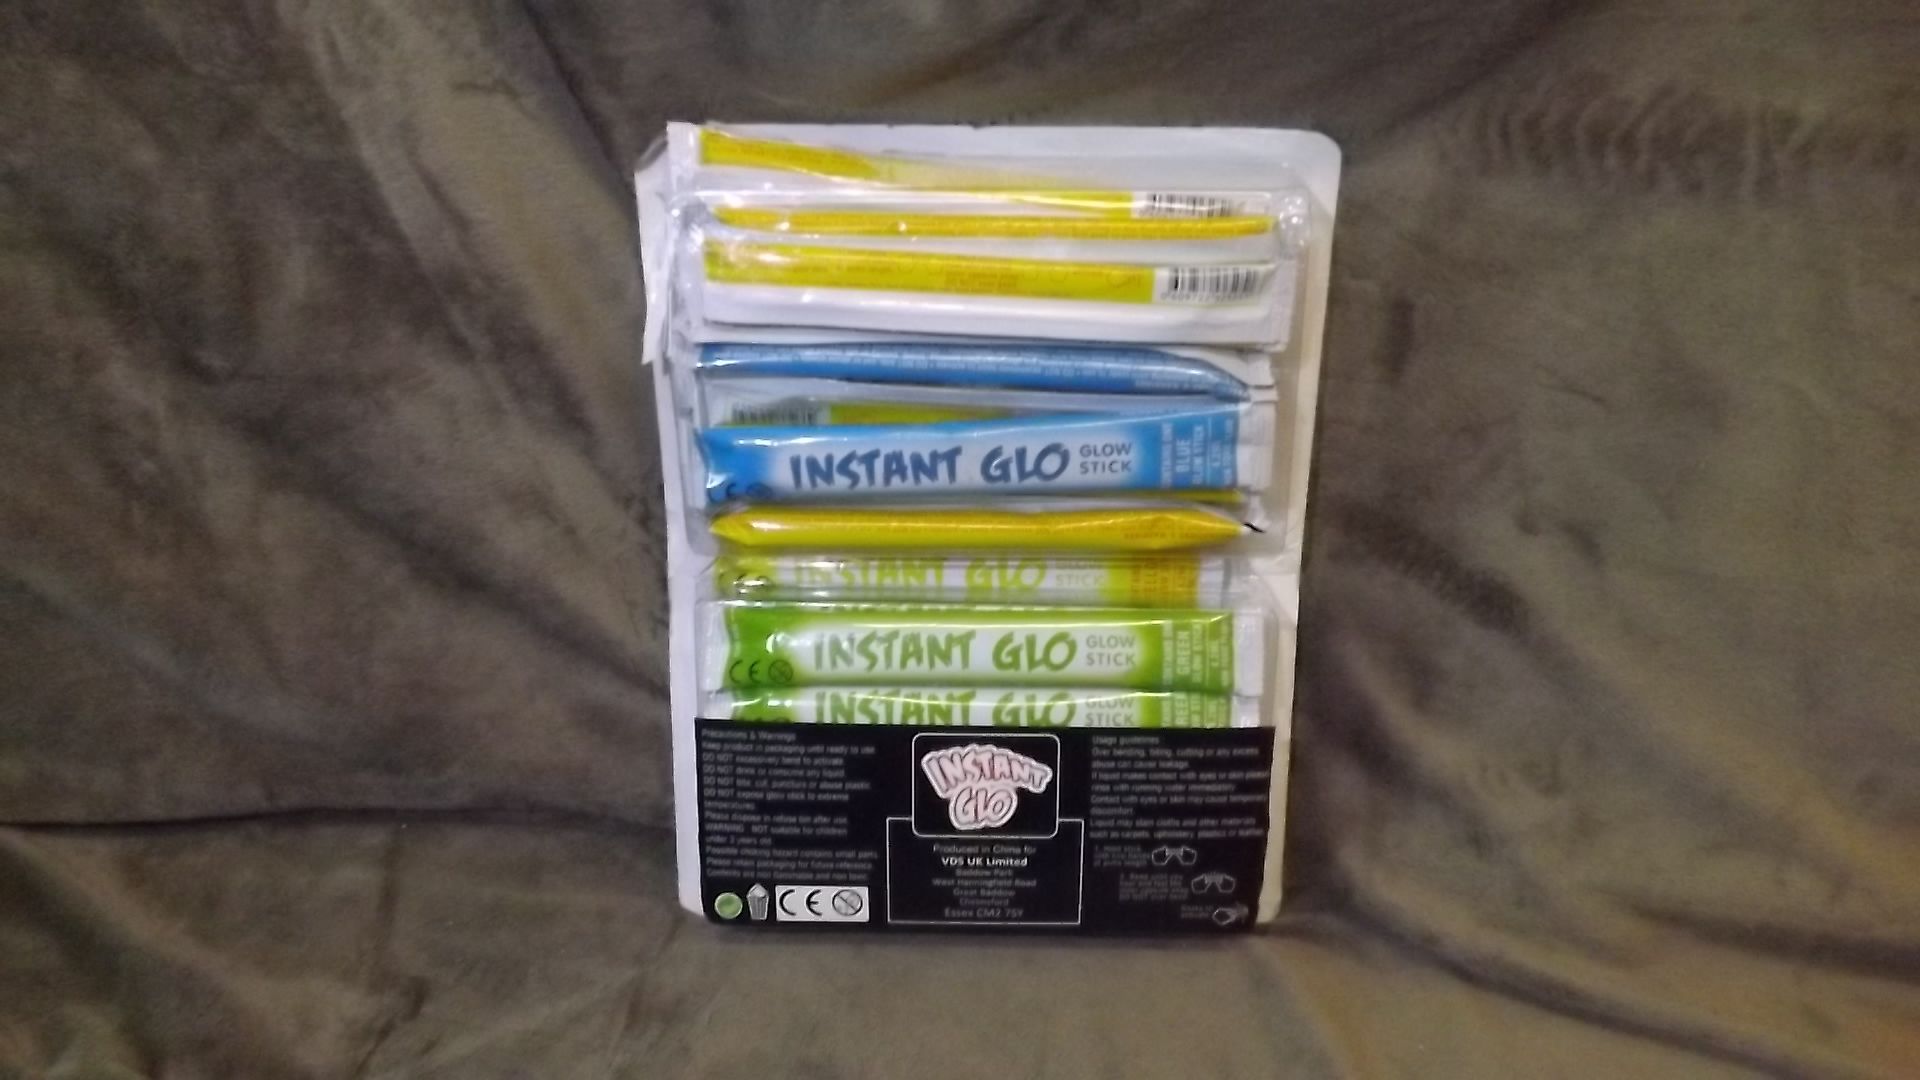 1 PACK OFAPPROX 27 INSTANT GLO LONG WHISTLE GLOW STICKS RRP £29.99